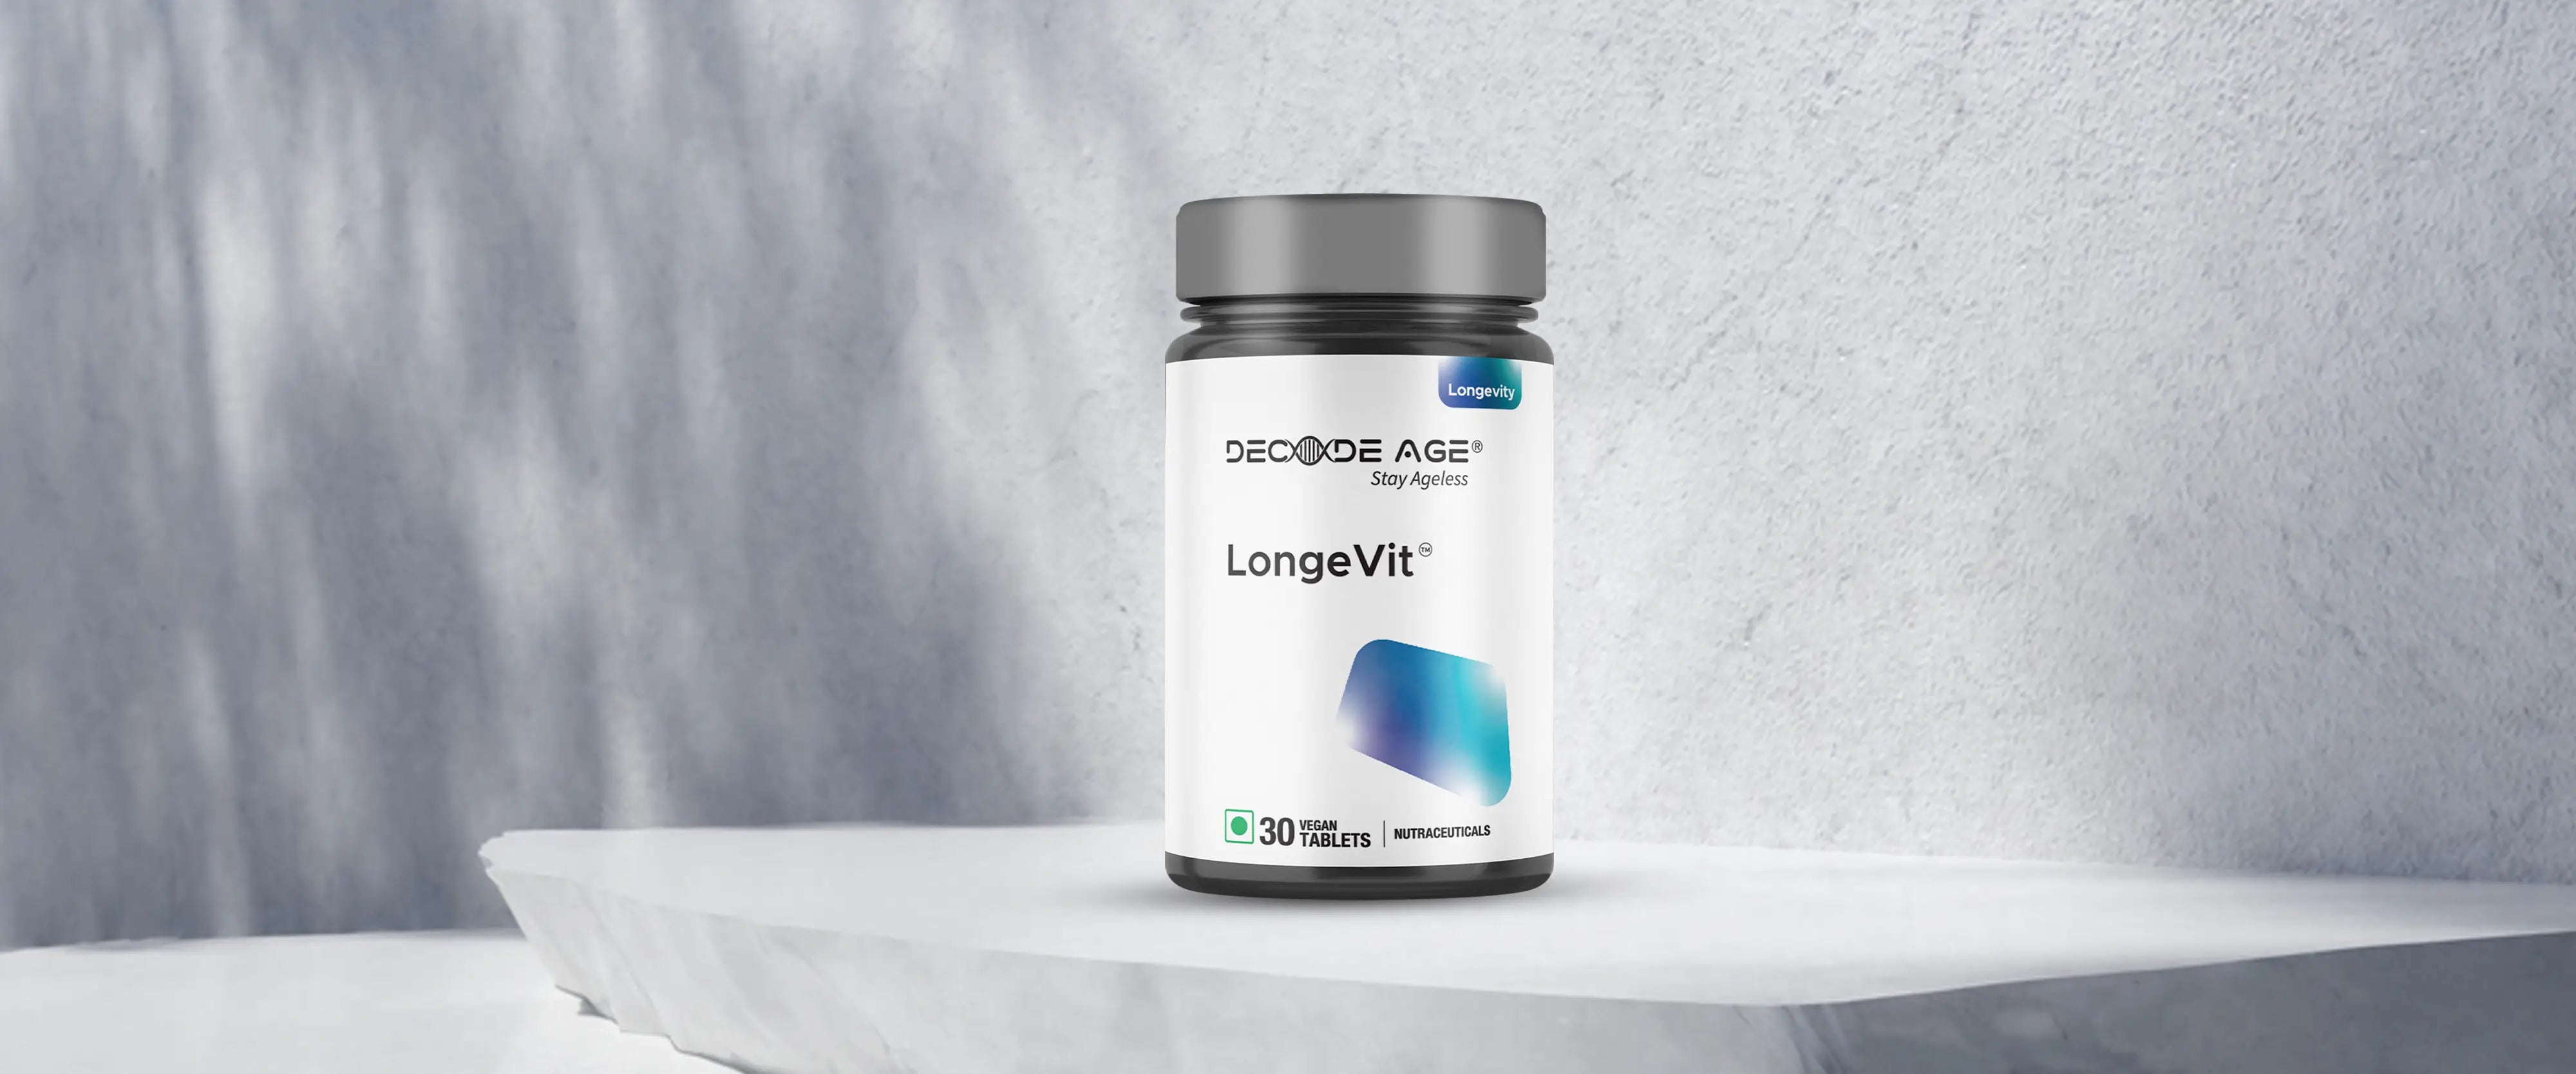 What is LongeVit? Why Is It a Better Choice to Begin Your Healthy Ageing Journey?